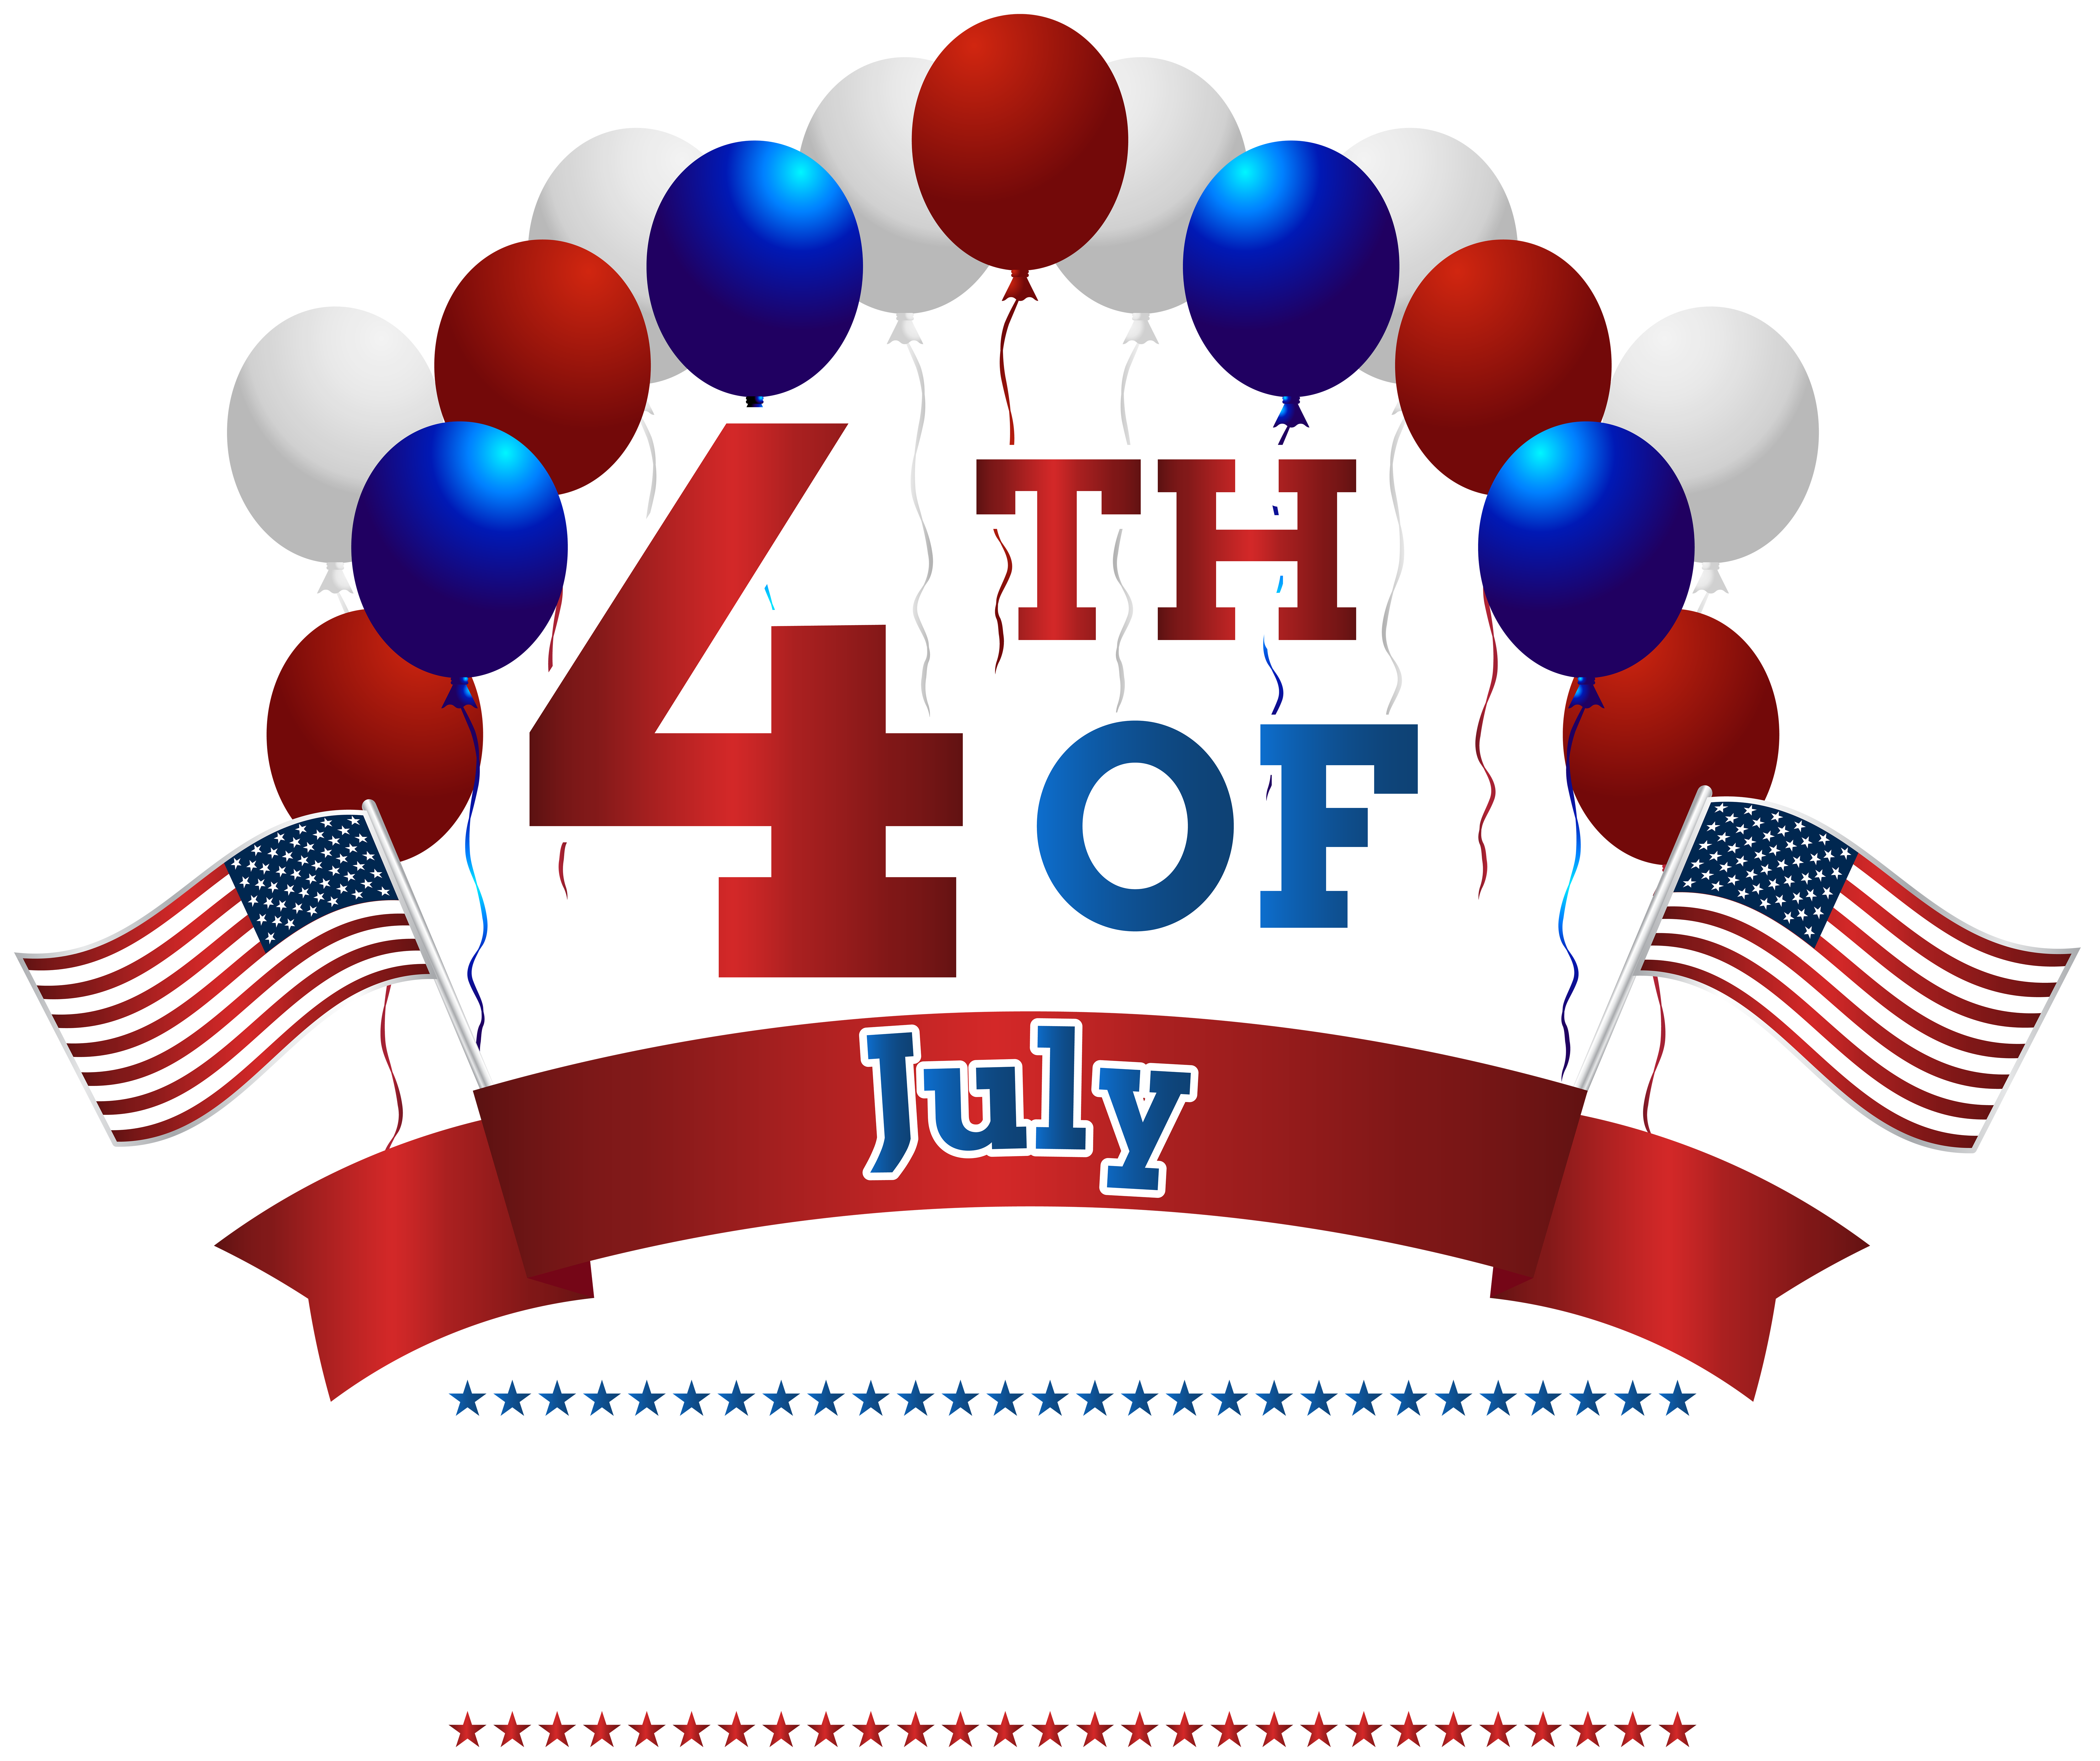 free clipart images independence day - photo #47